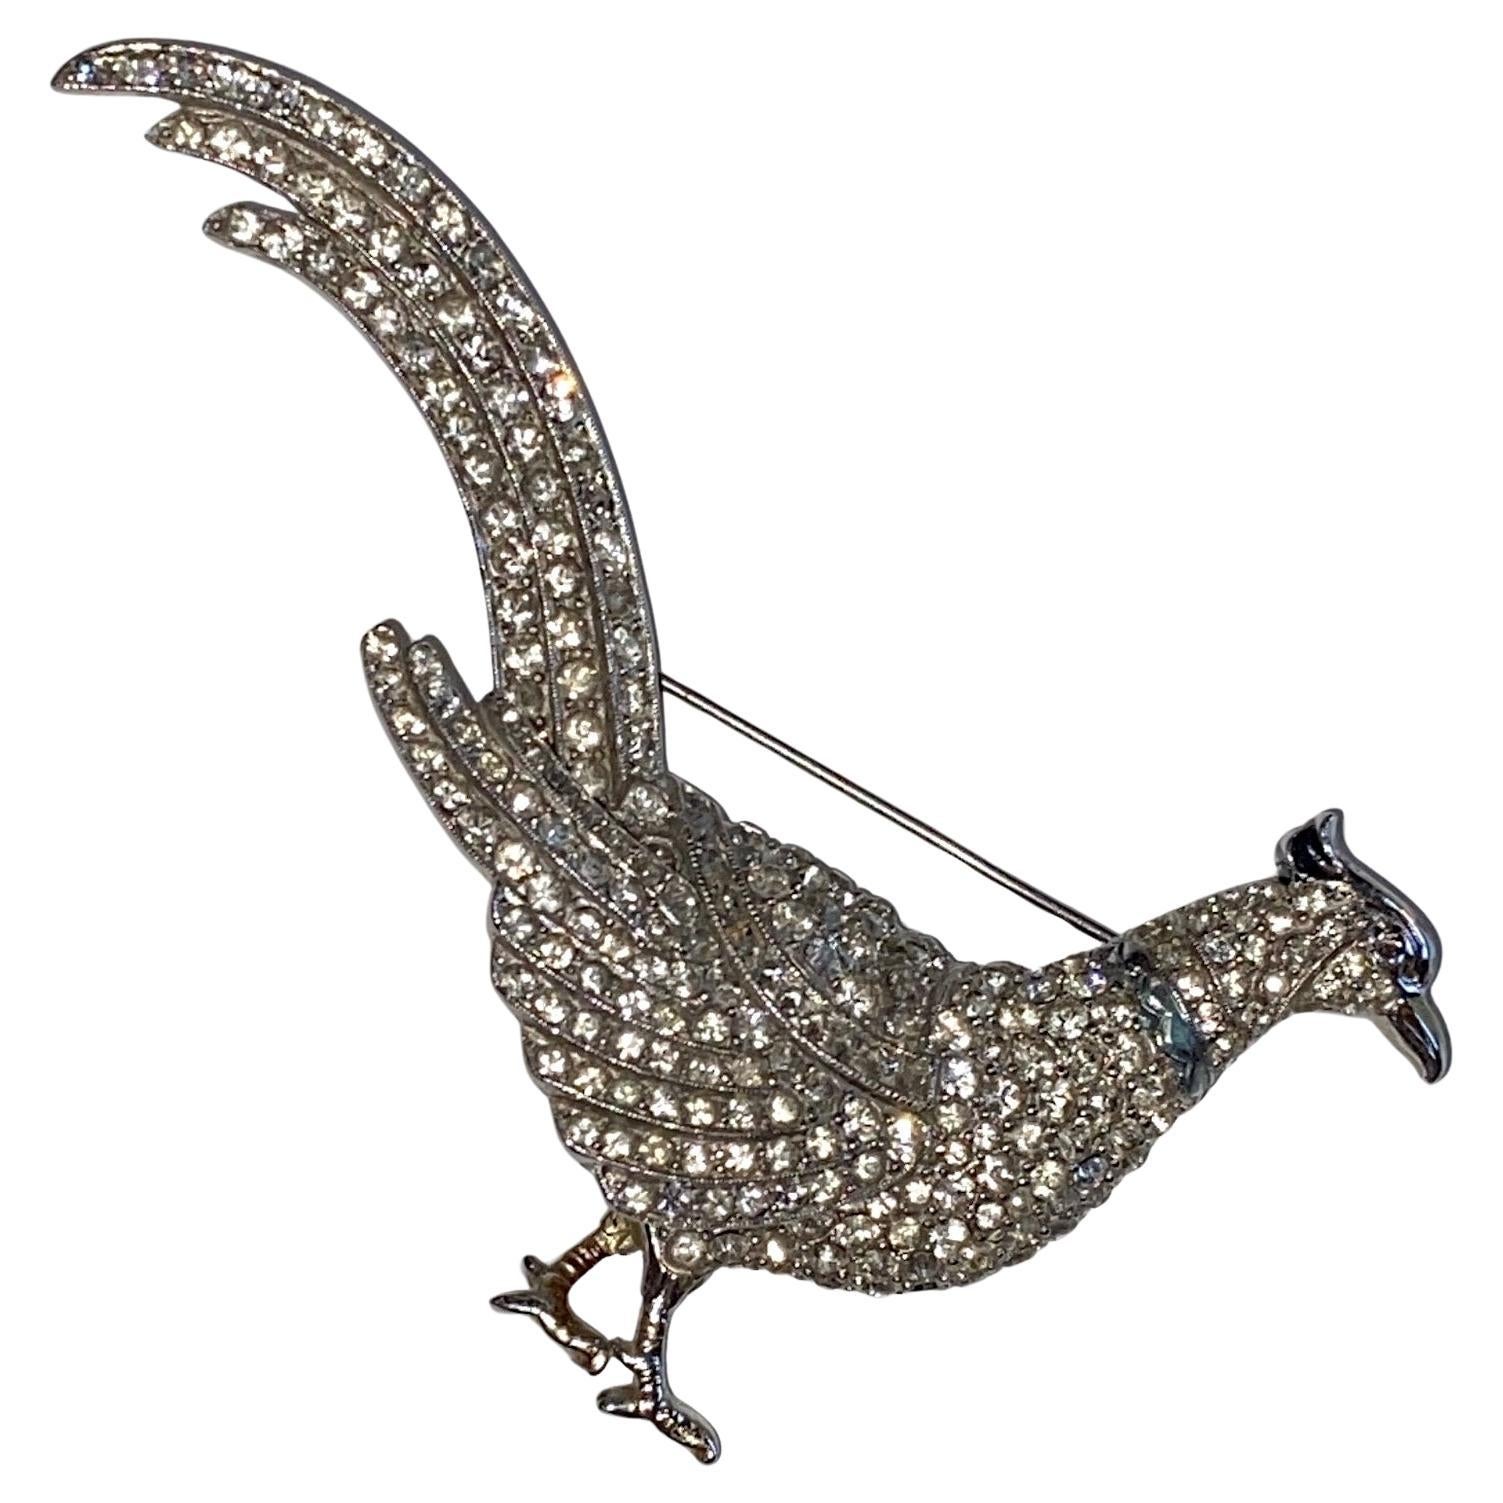 Presented is a beautiful rhinestone encrusted large pheasant brooch designed by Adolph Katz for Coro Inc. The design was patented in 1942. The pheasant is 4 inches long and 2.5 inches tall from the top of the tail to the bottom of the foot. It is